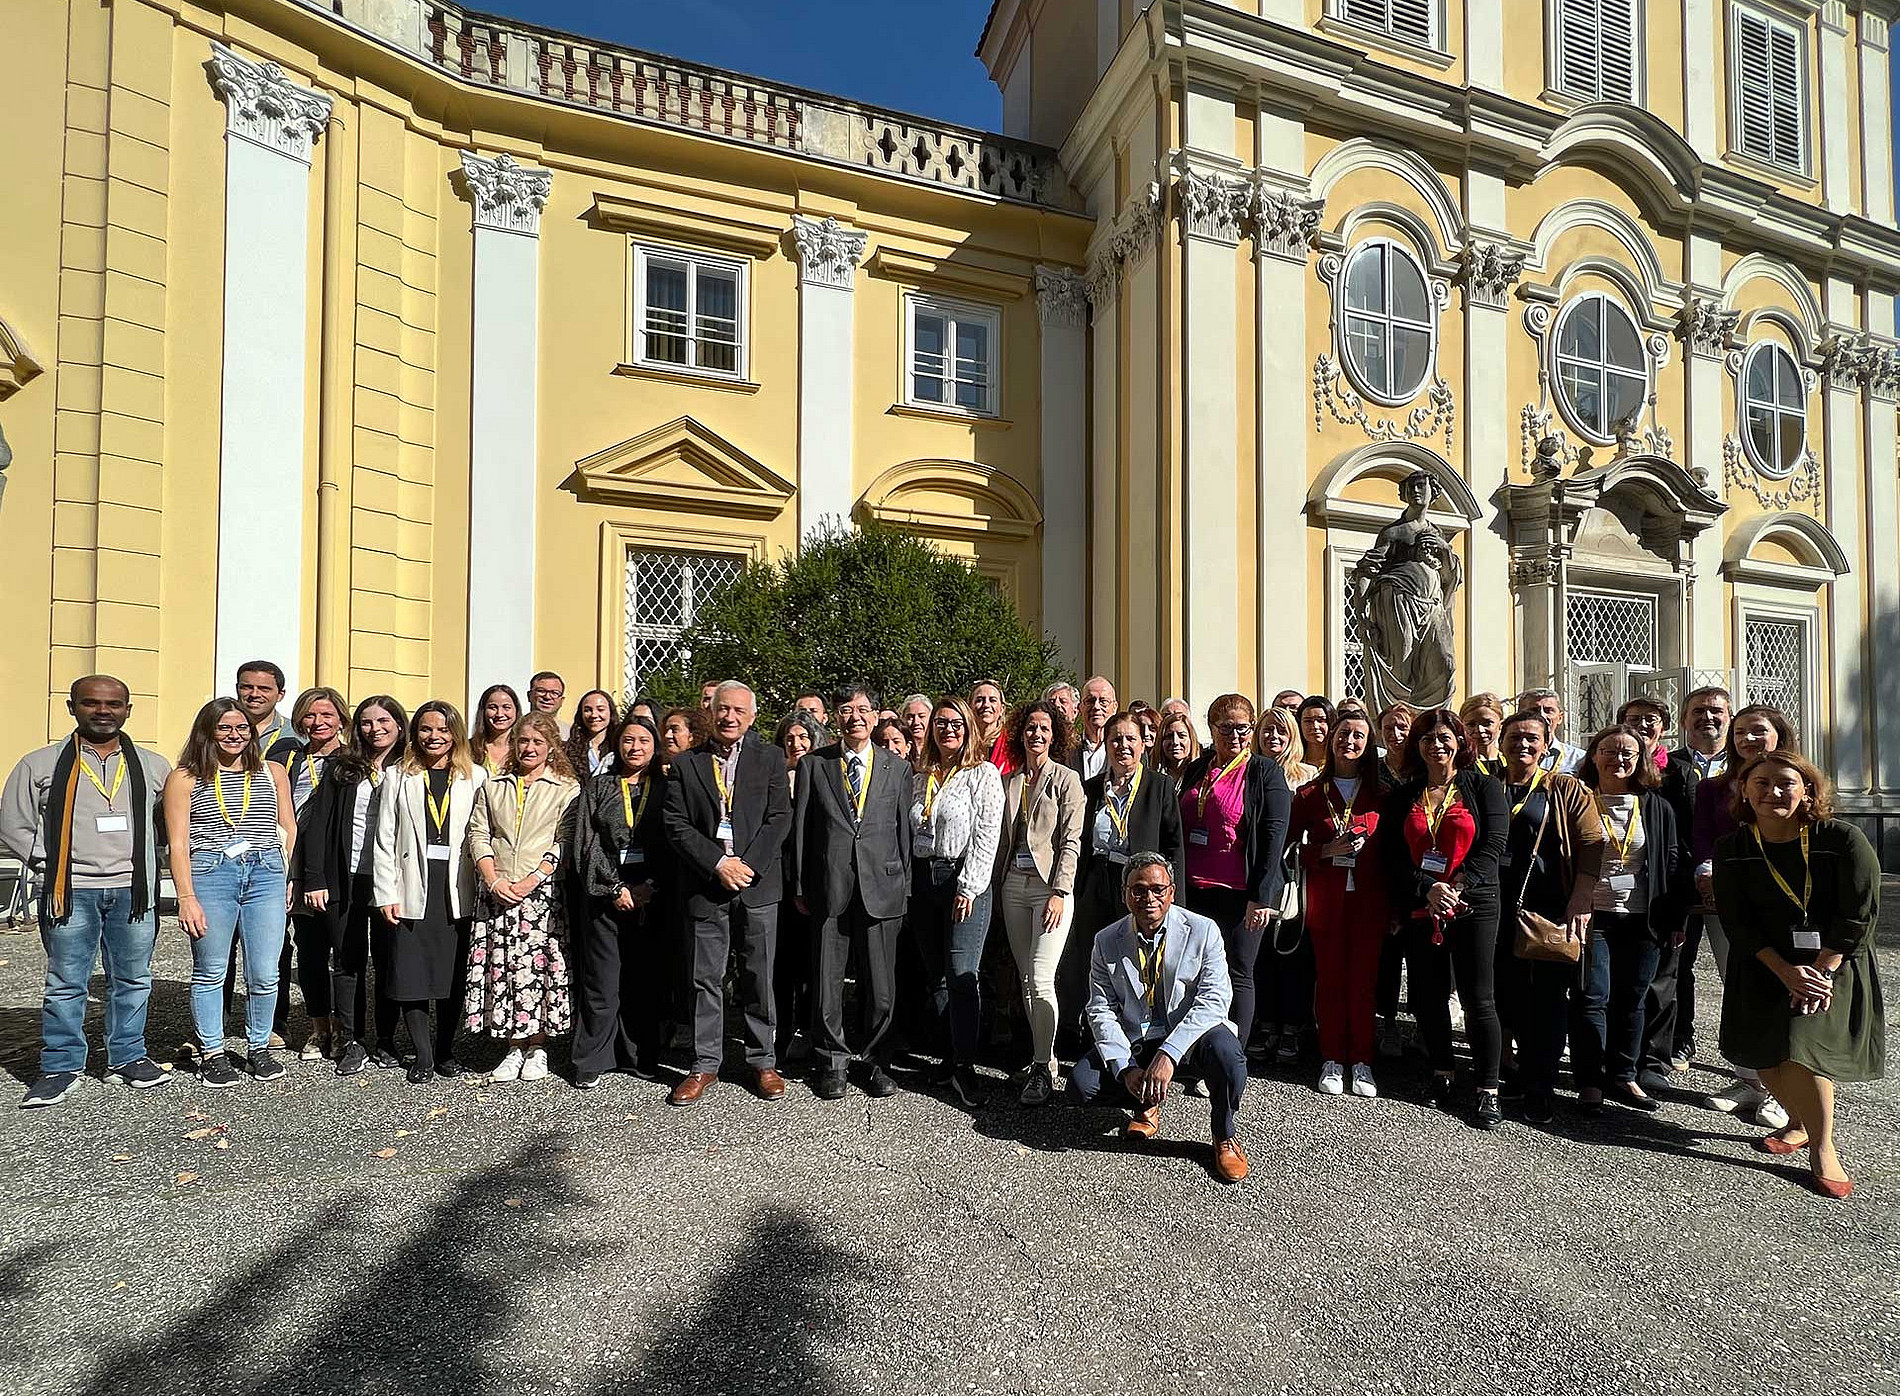 More than 70 scientists from 20 countries were guests at the Meerscheinschlössl.  